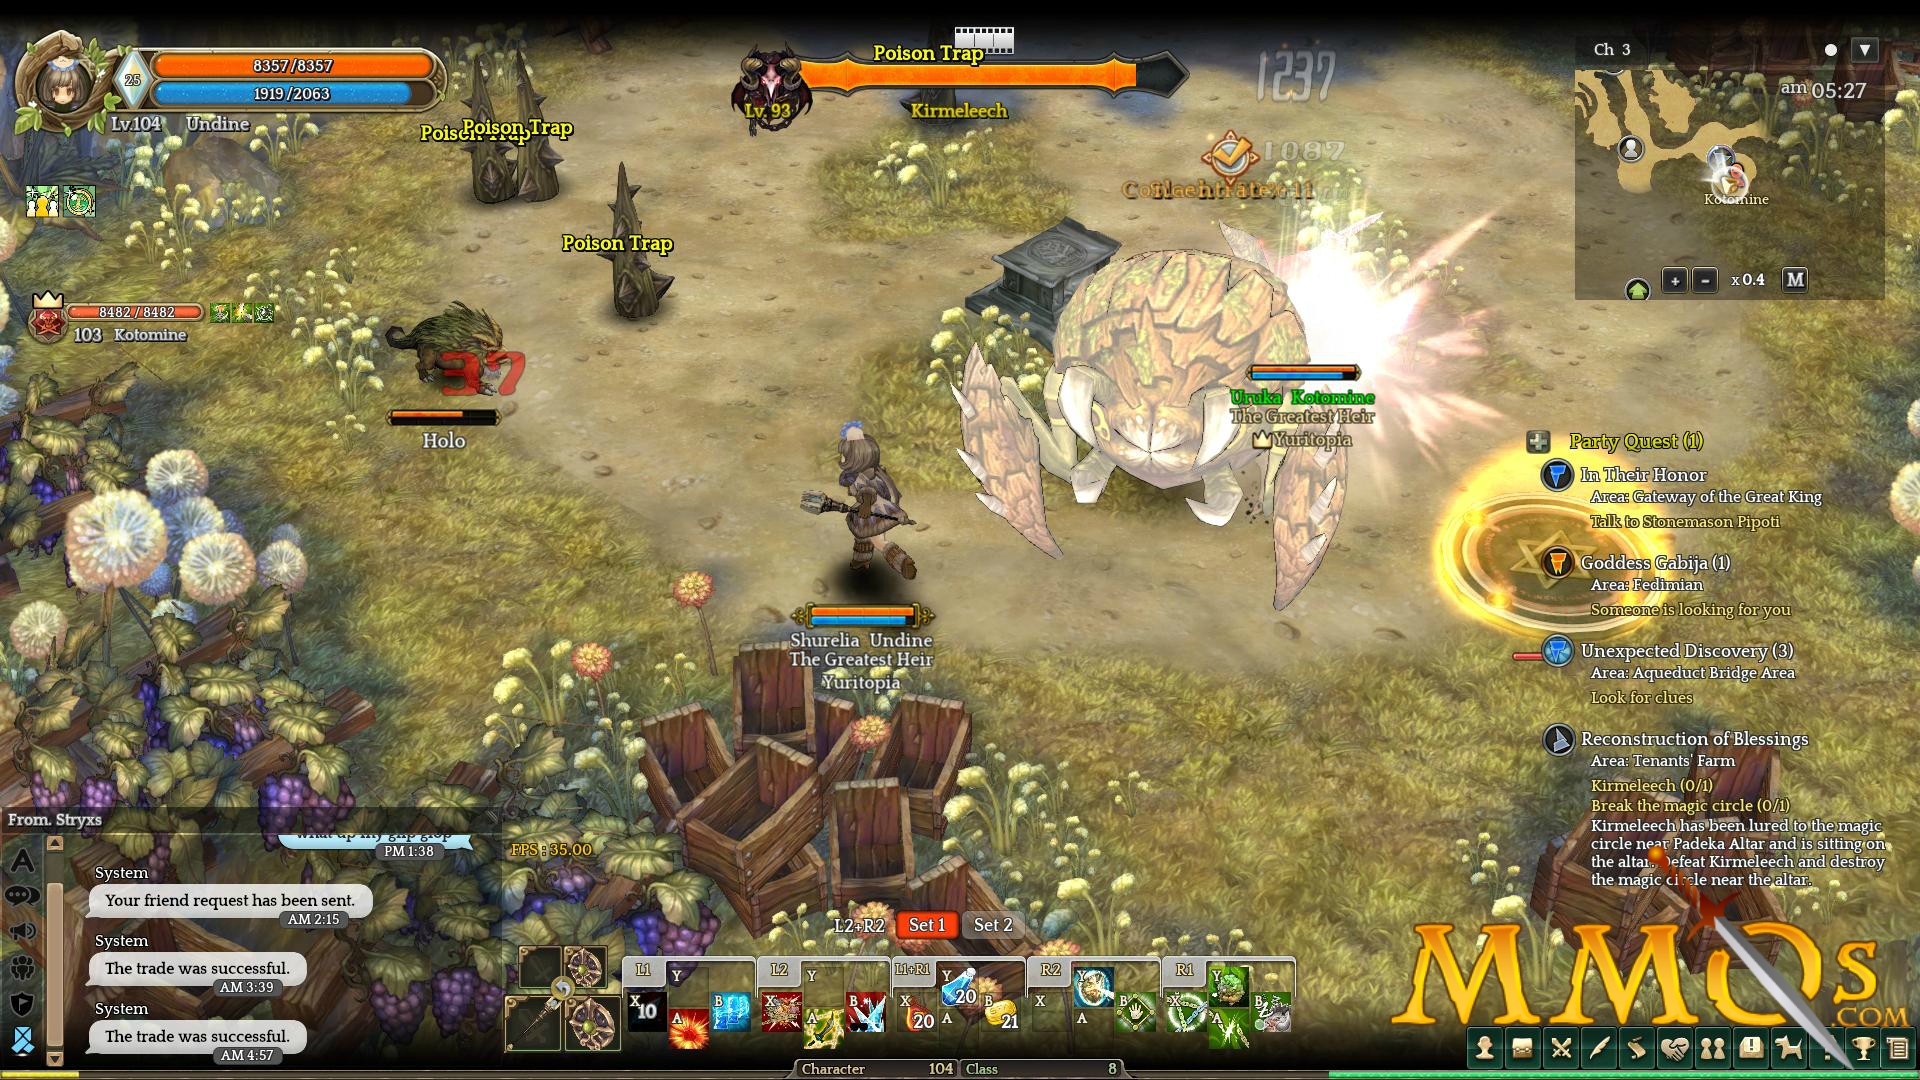 First Impressions on The West free-to-play Browser MMORPG Game